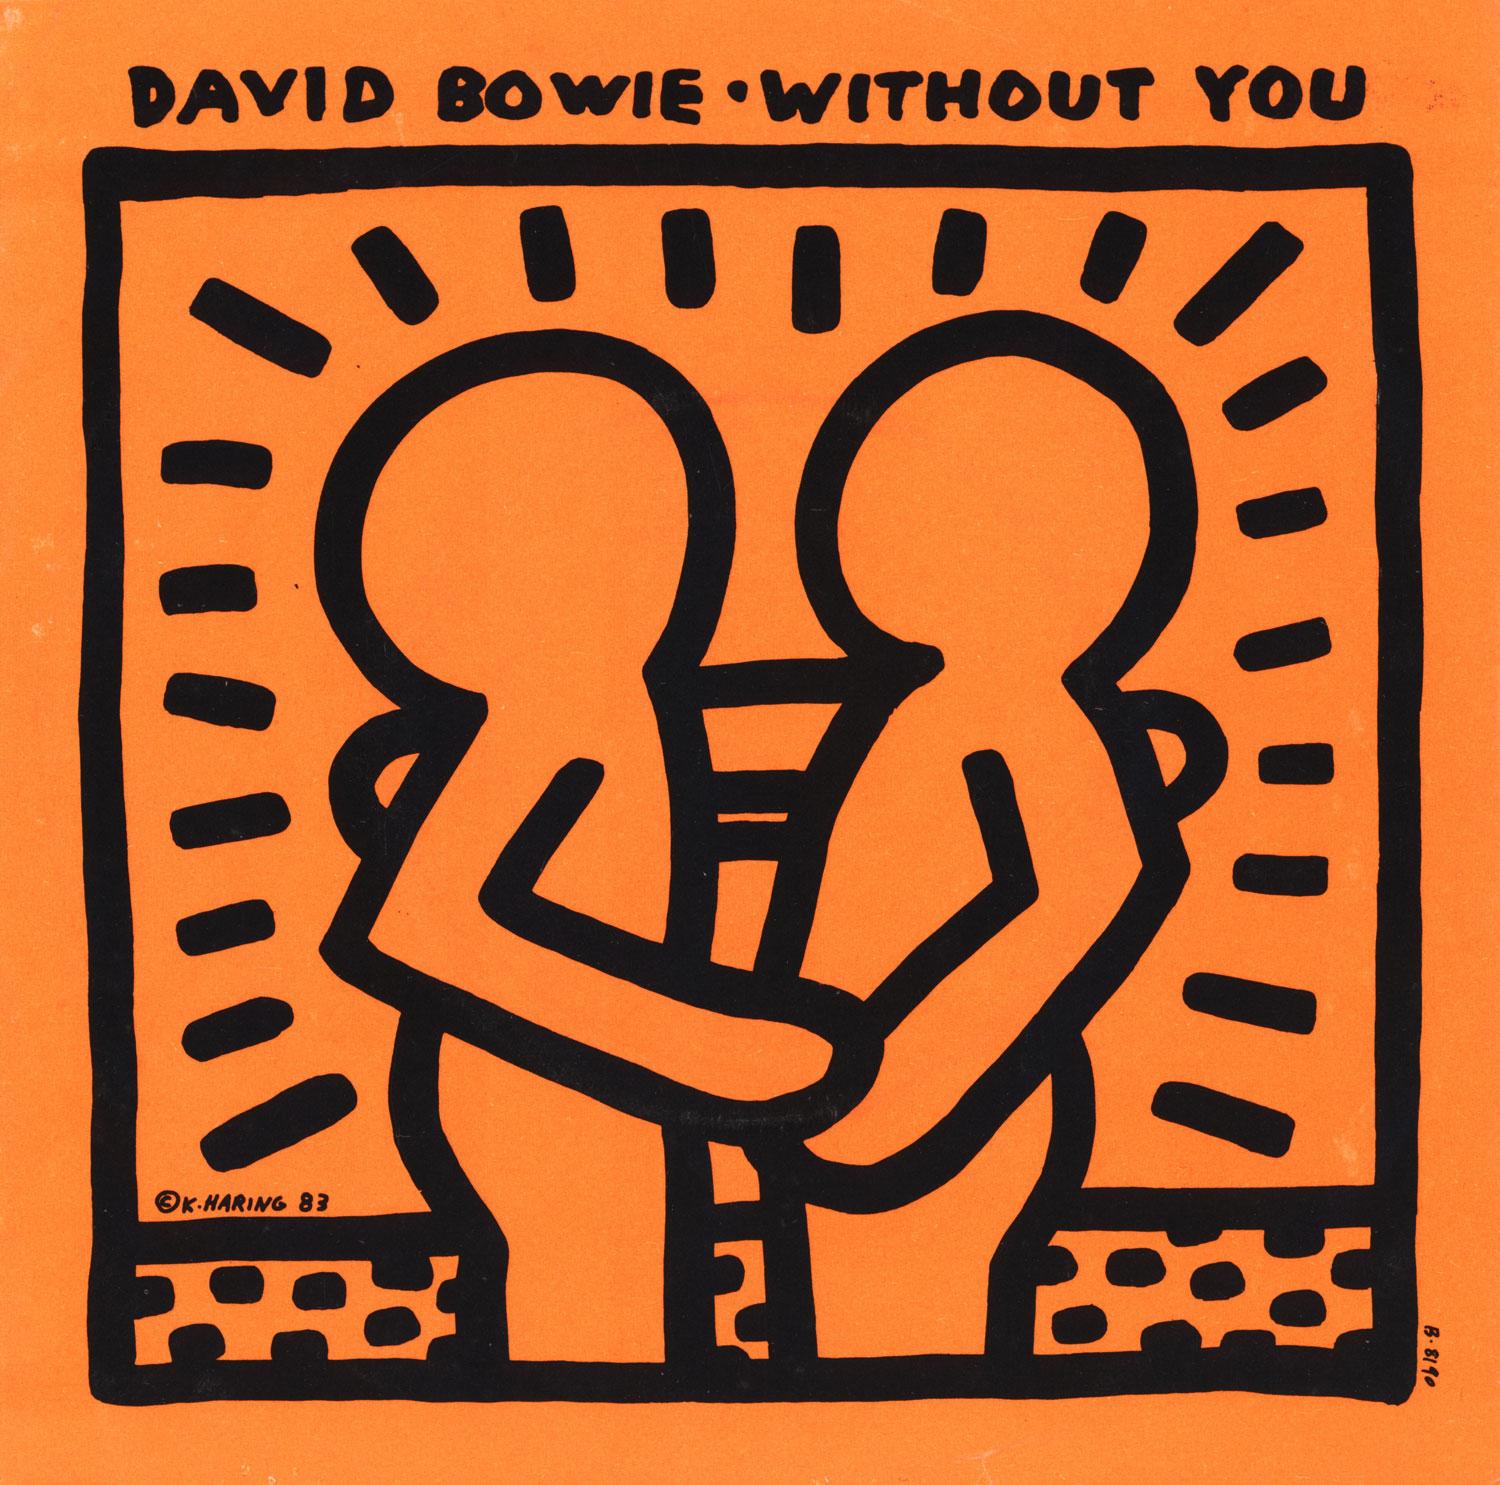 1980s Keith Haring Record Art:
David BOWIE "Without You" A Rare Highly Sought After Vinyl Art Cover featuring original cover artwork by Keith Haring.

Year: 1983.

Medium: Off-Set Lithograph.

Dimensions: 7 x 7 inches.

Cover: Very good overall